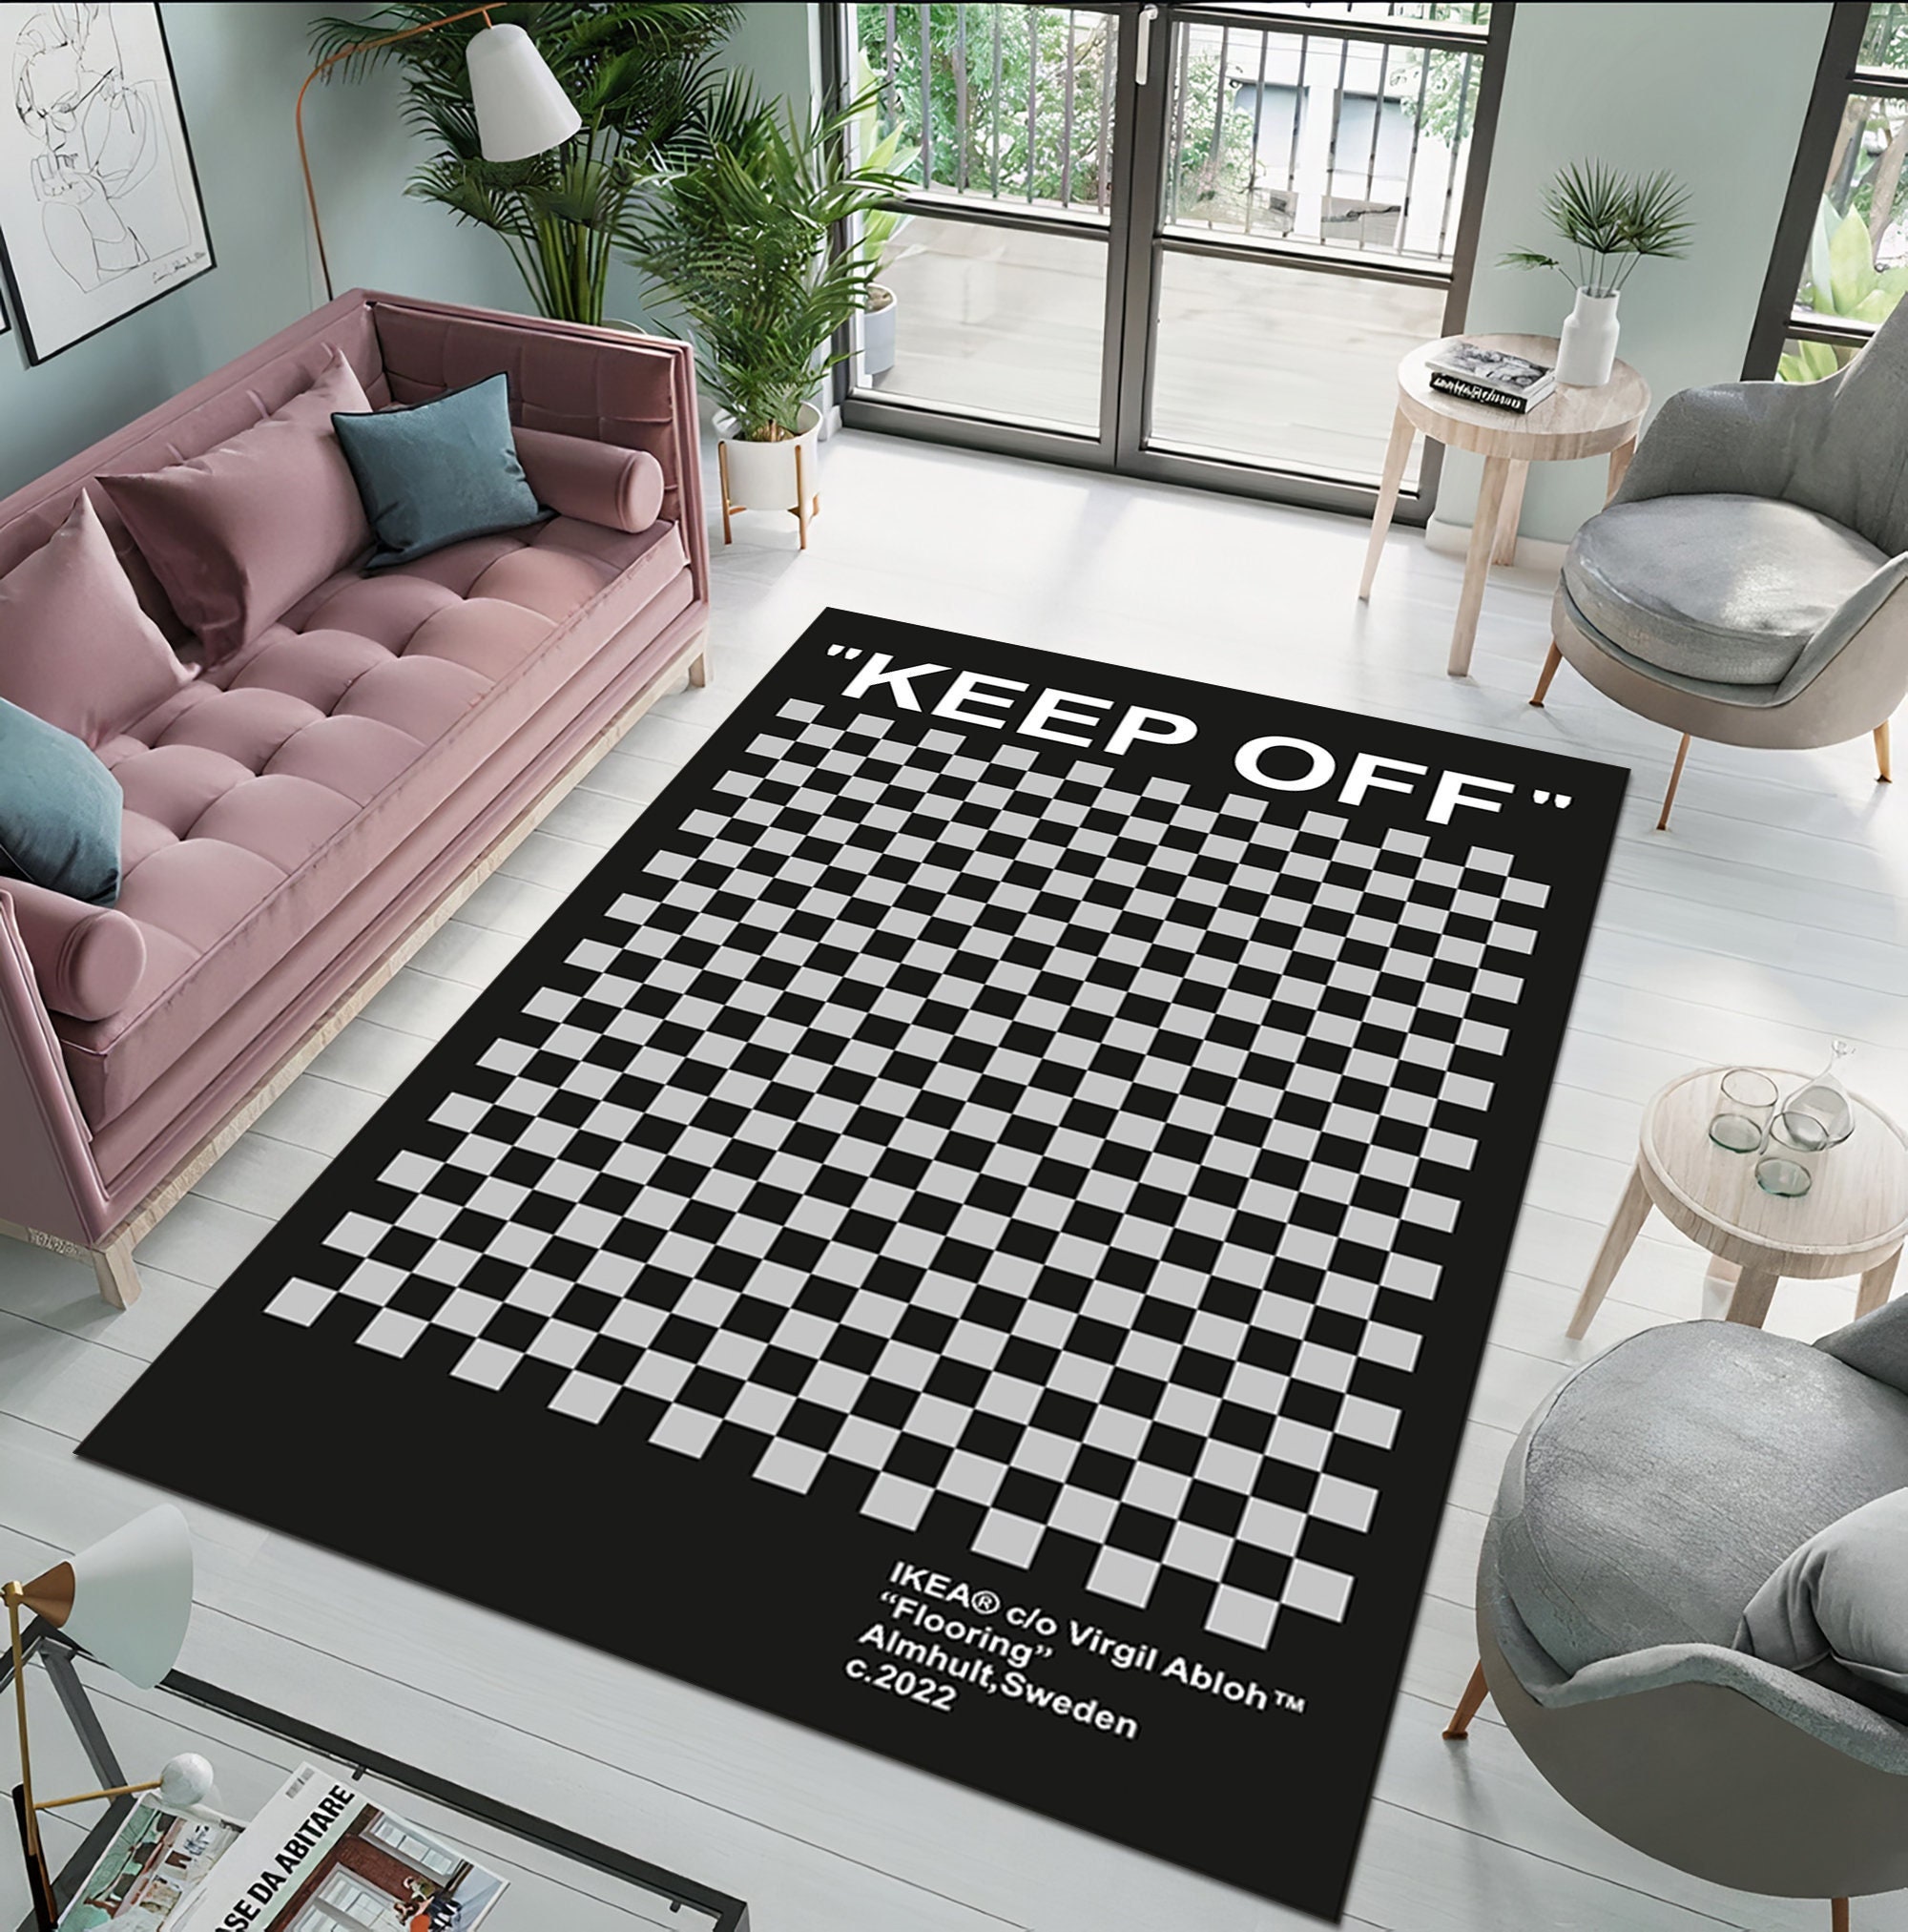 Keep off Rug,chechered Rug,keep off Black Rug,design Rugs,gift for Her,area  Rug,personalized Gift,rug for Living Room,home Decorative Rug, 